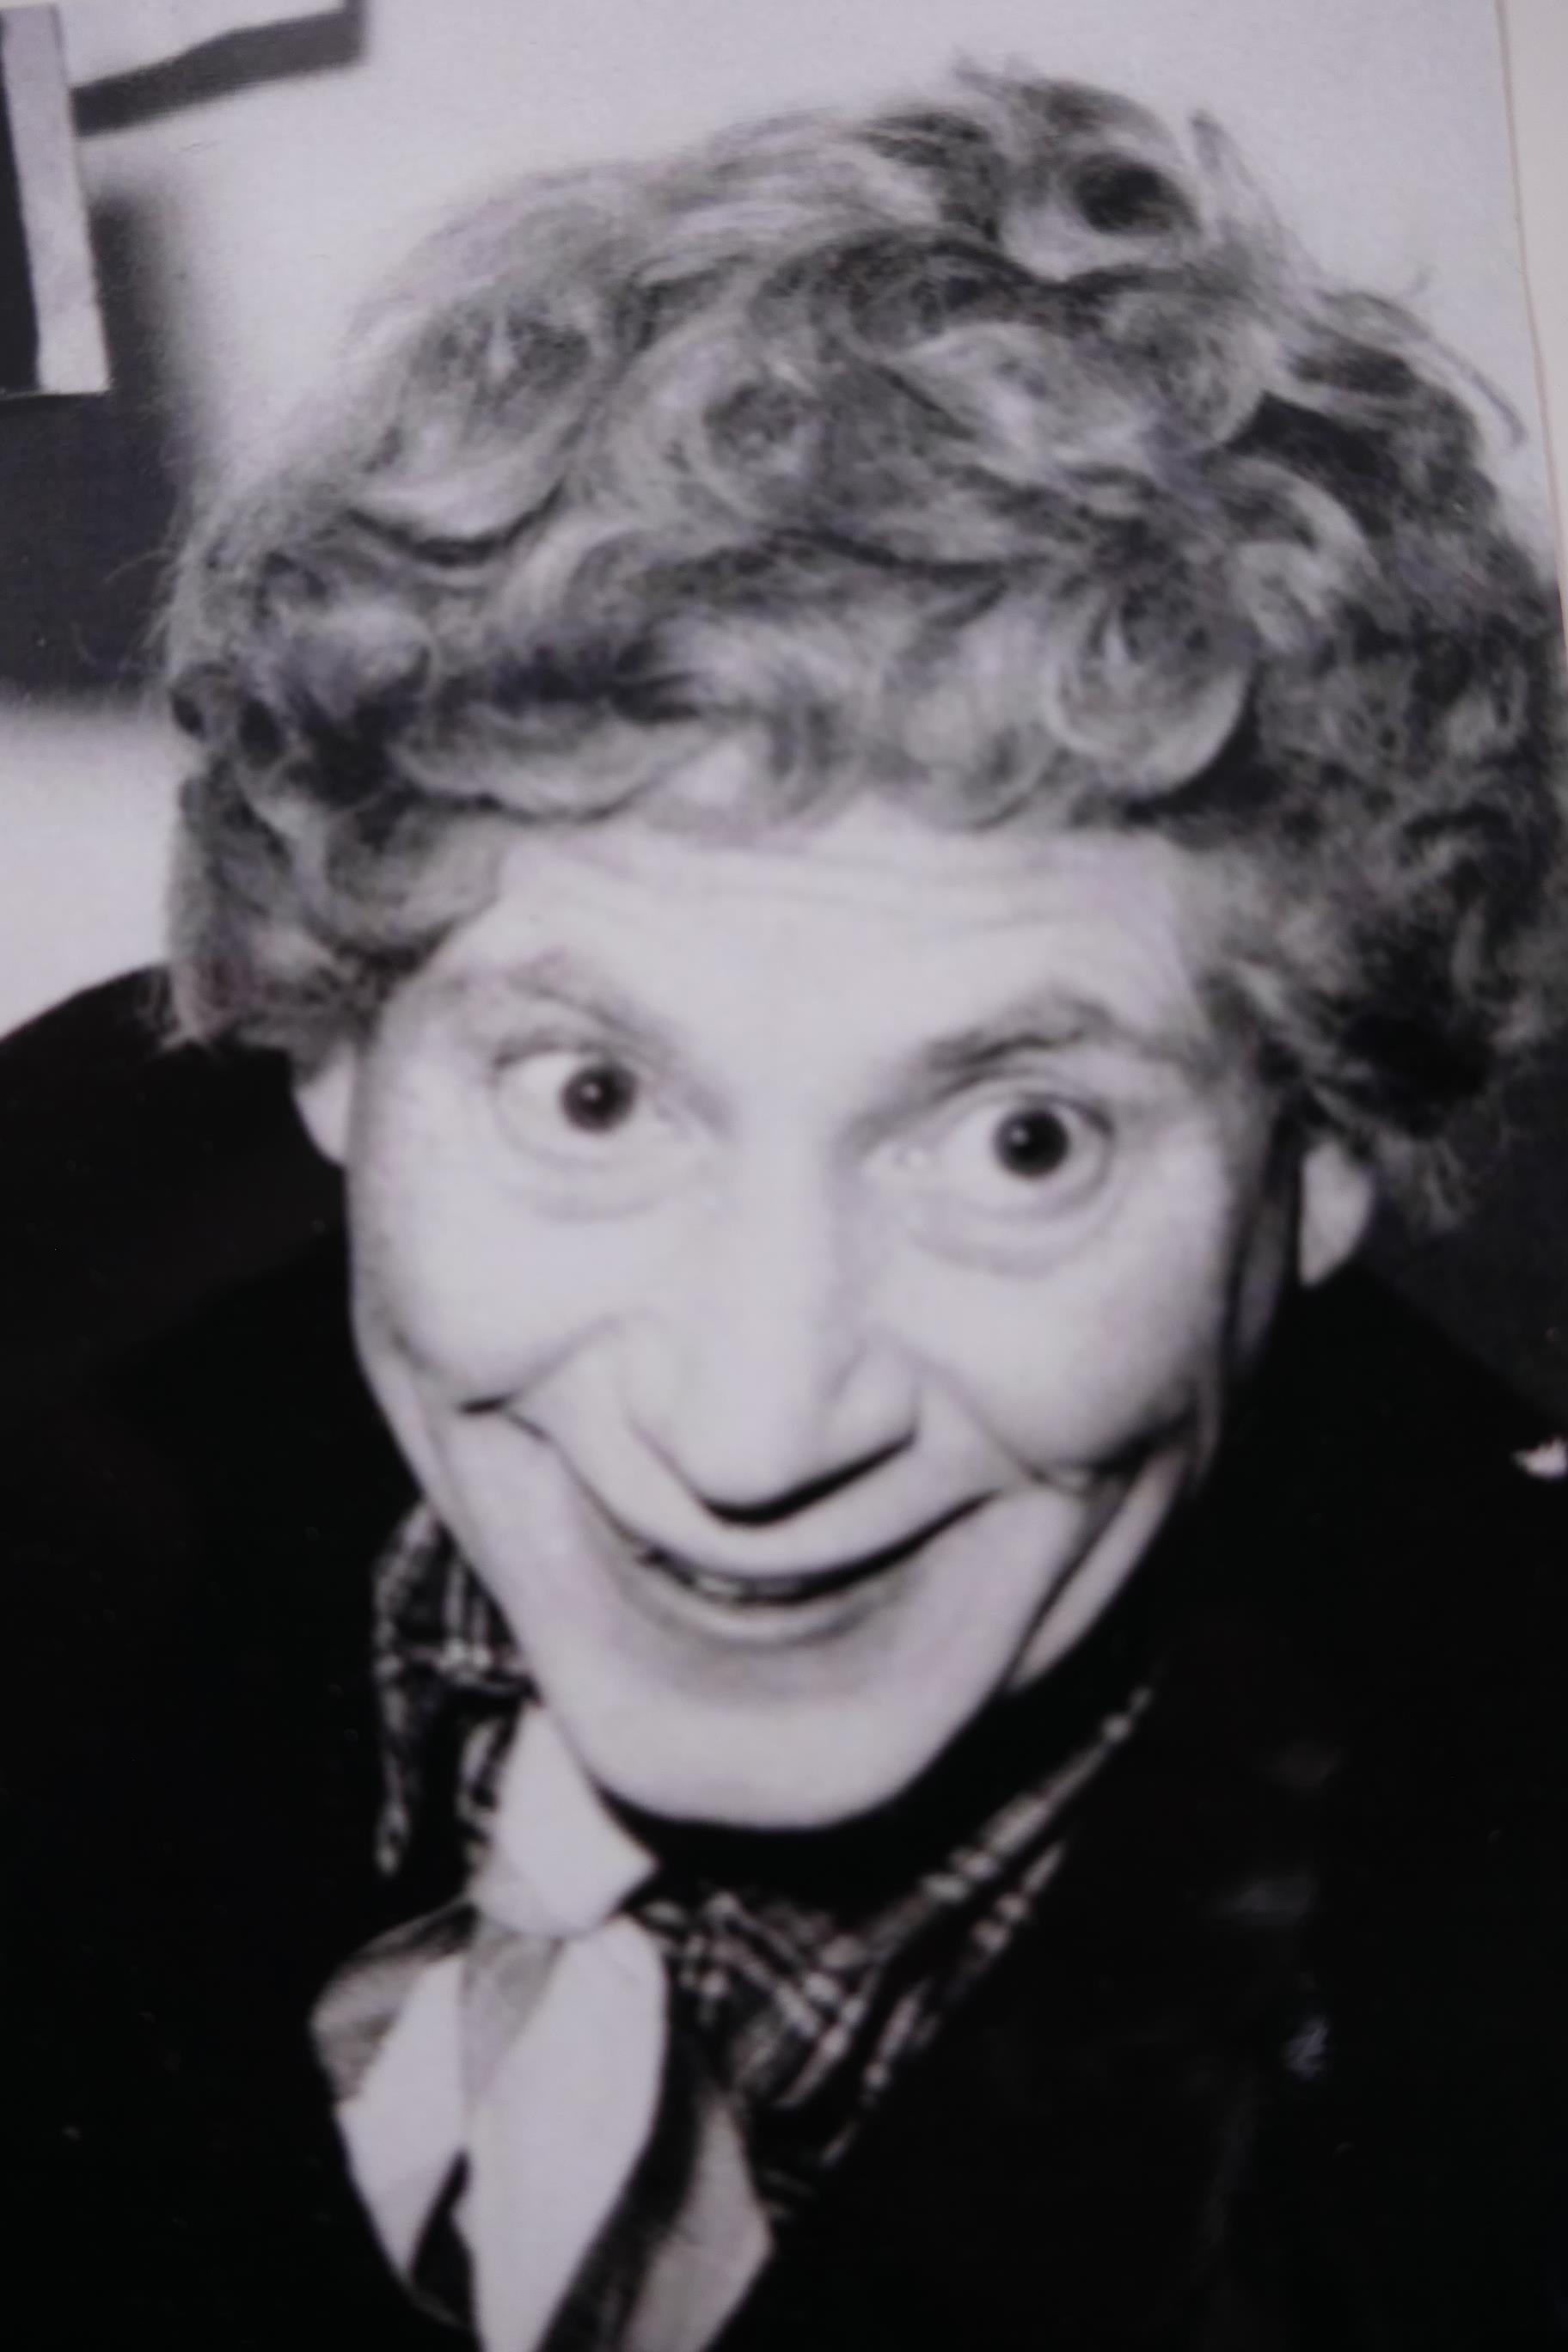 Harpo Marx (& his wife Susan) (American, 1888-1964) - American comedian, musician and actor - Image 8 of 13